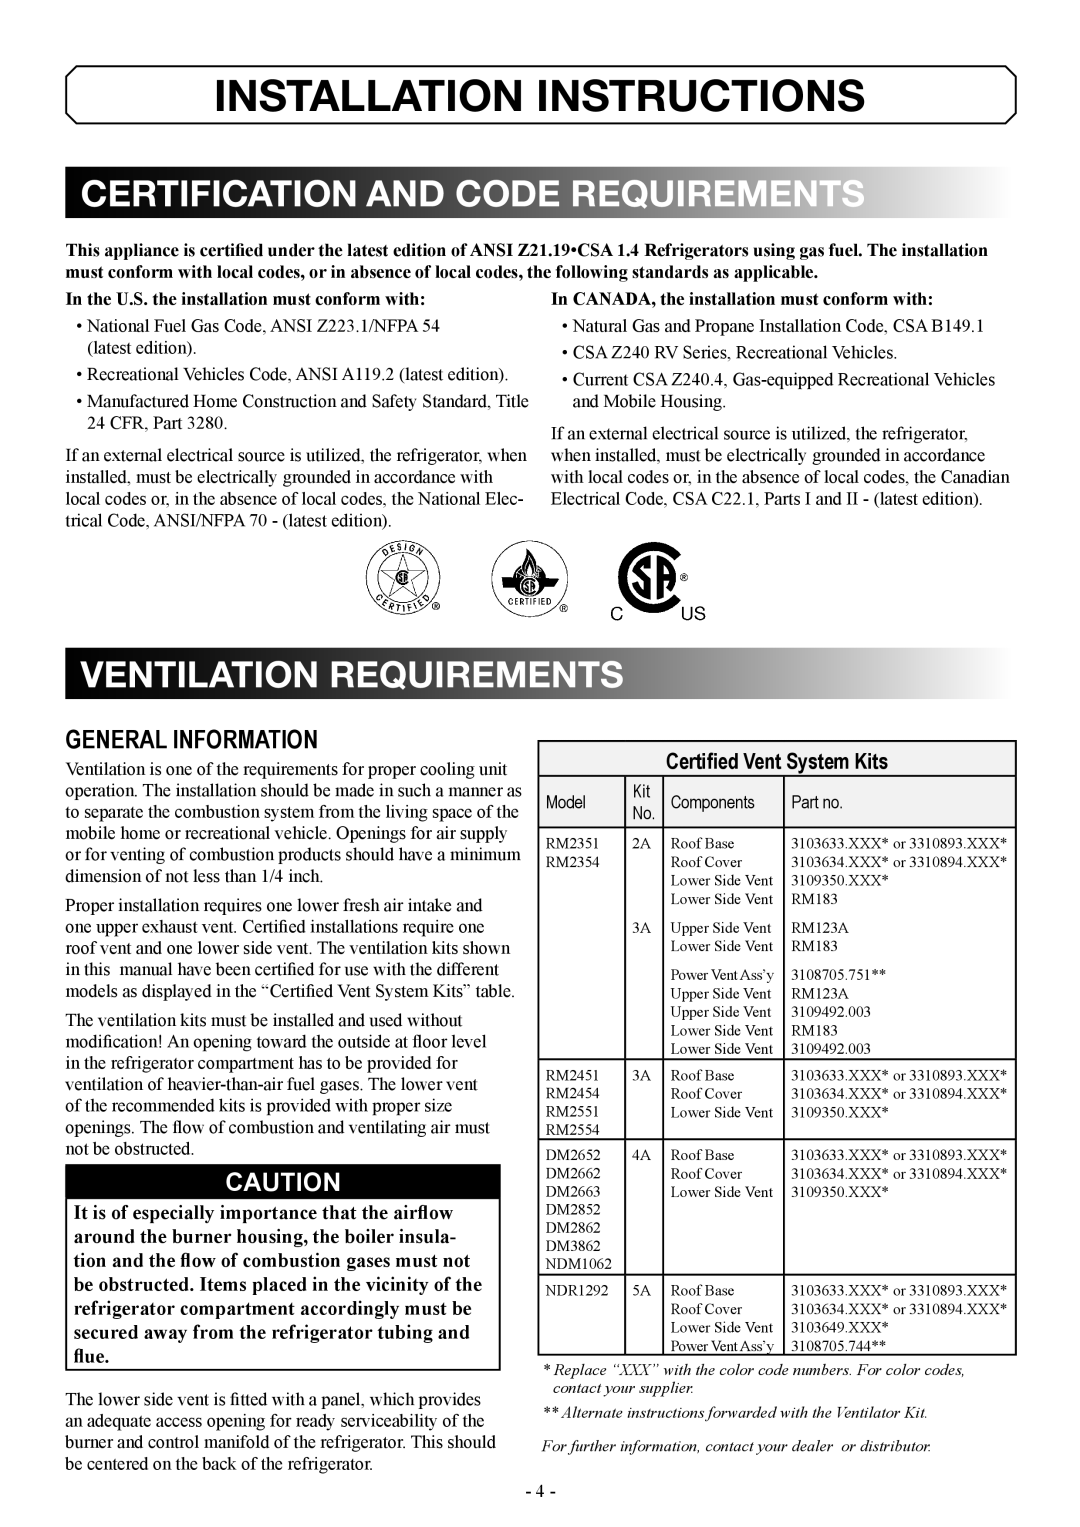 Dometic DM2862 manual Installation Instructions, Certification and Code Requirements, Ventilation requirements 